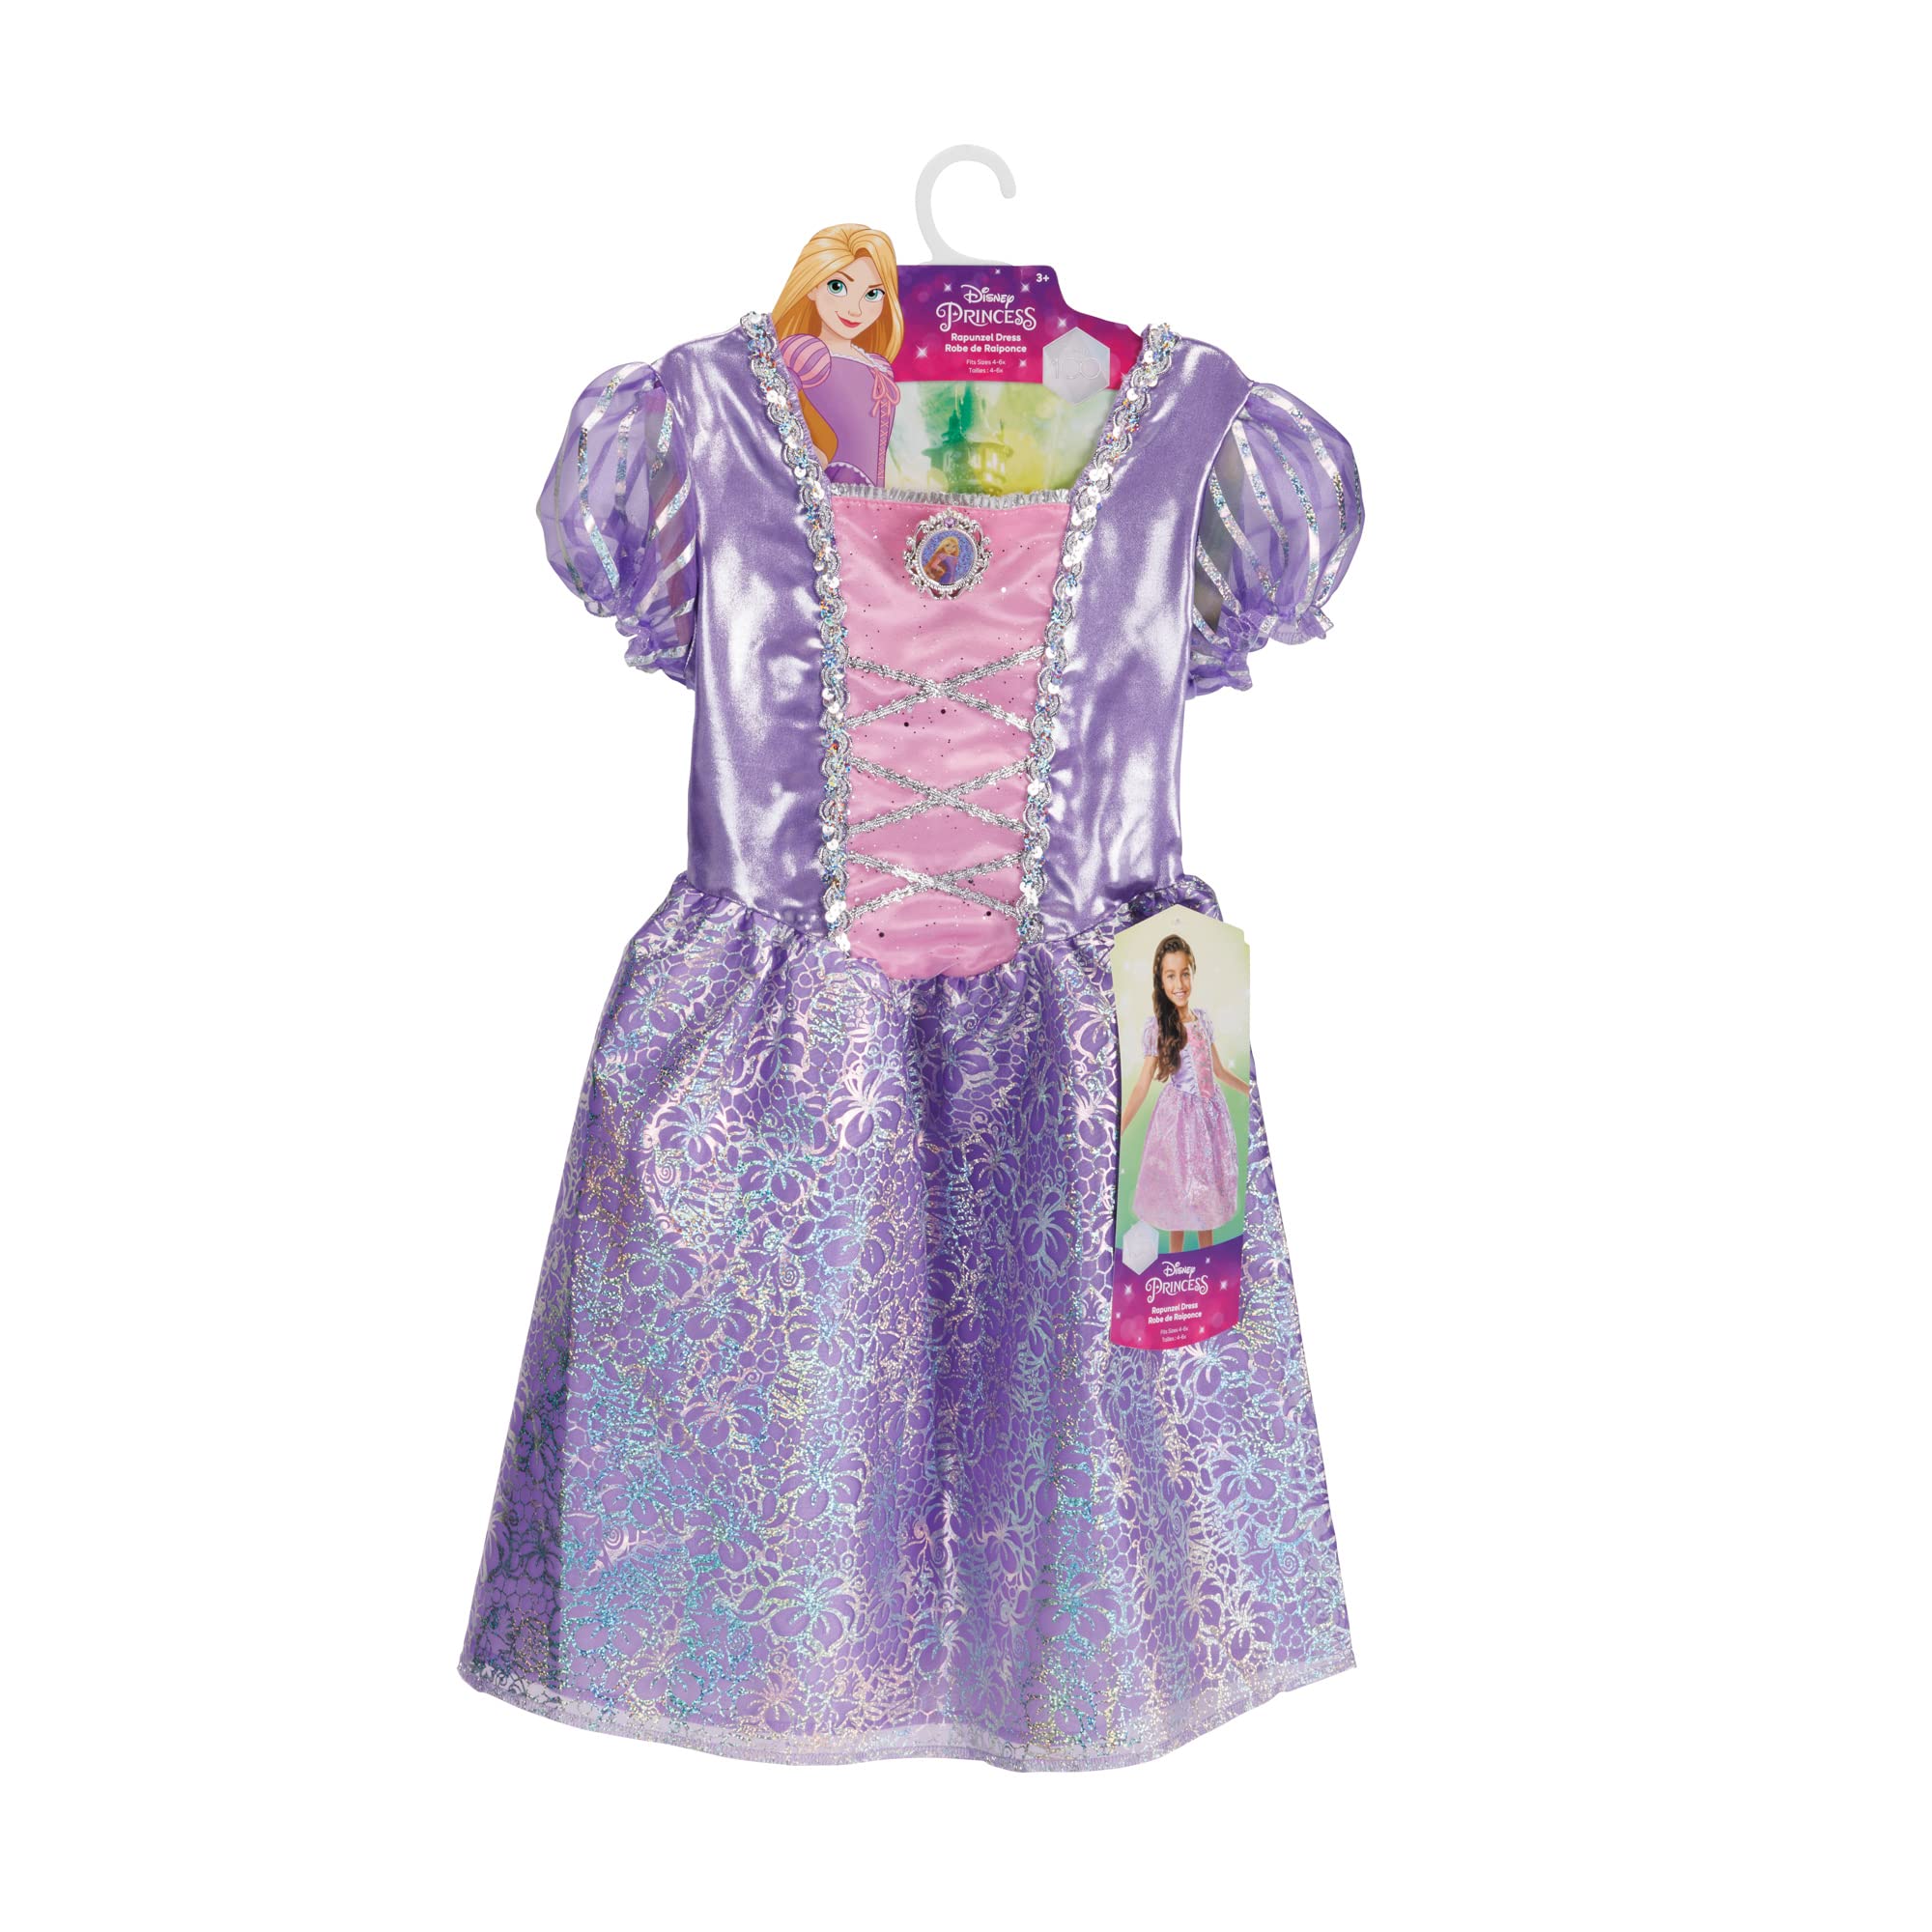 Disney Princess Rapunzel Dress Costume for Girls, Perfect for Party, Halloween Or Pretend Play Dress Up